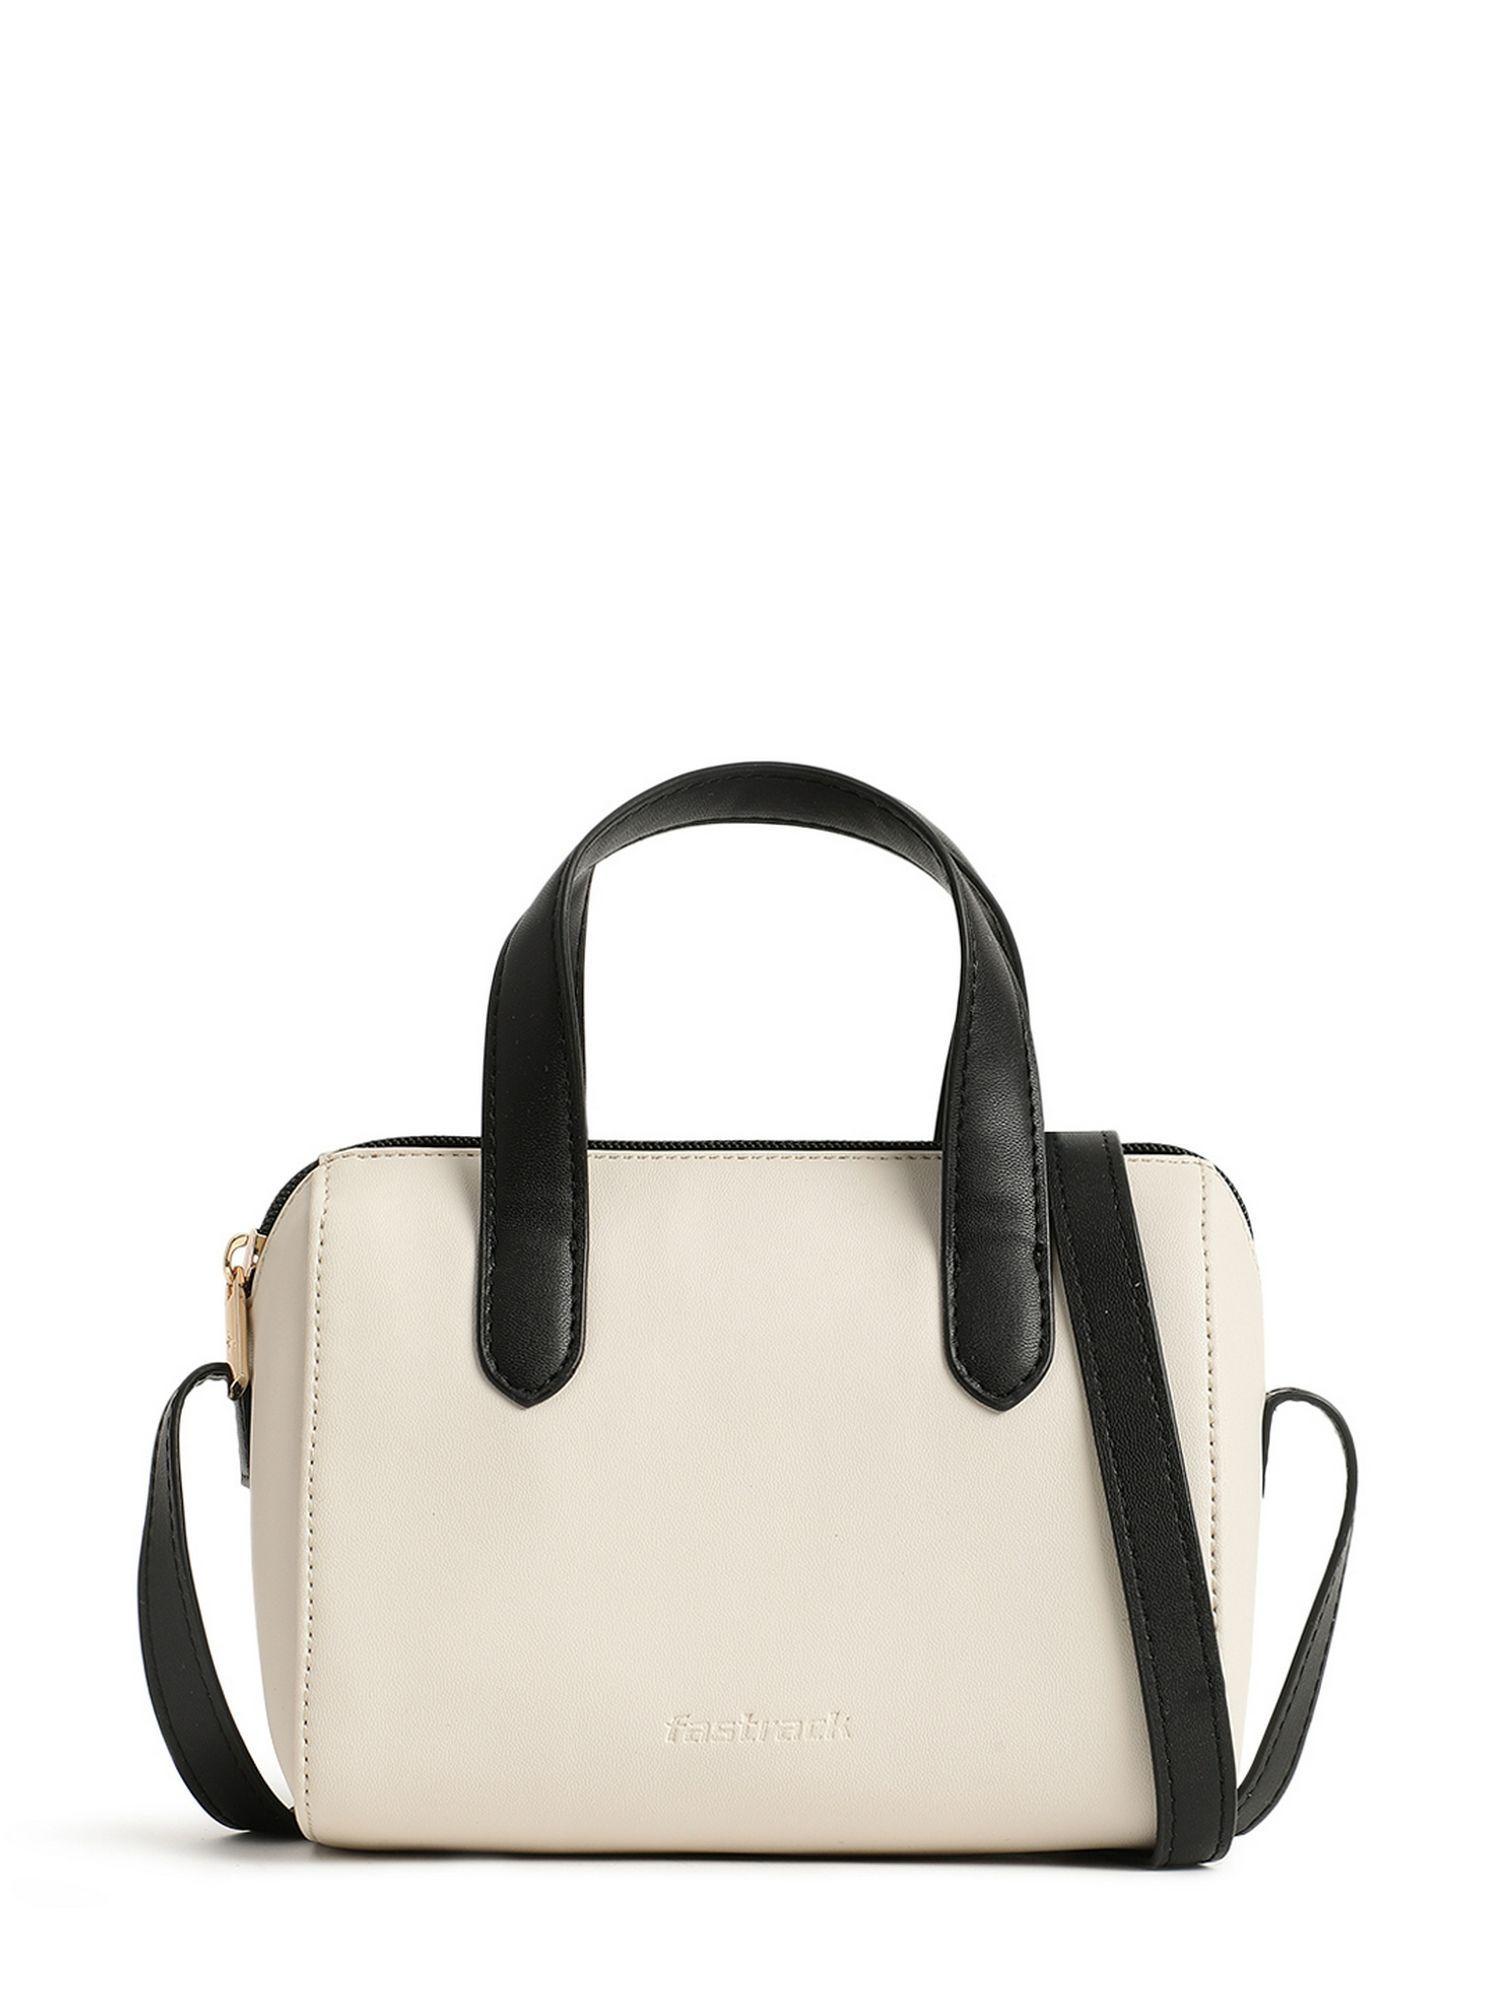 pearl white n casual sling bag for women